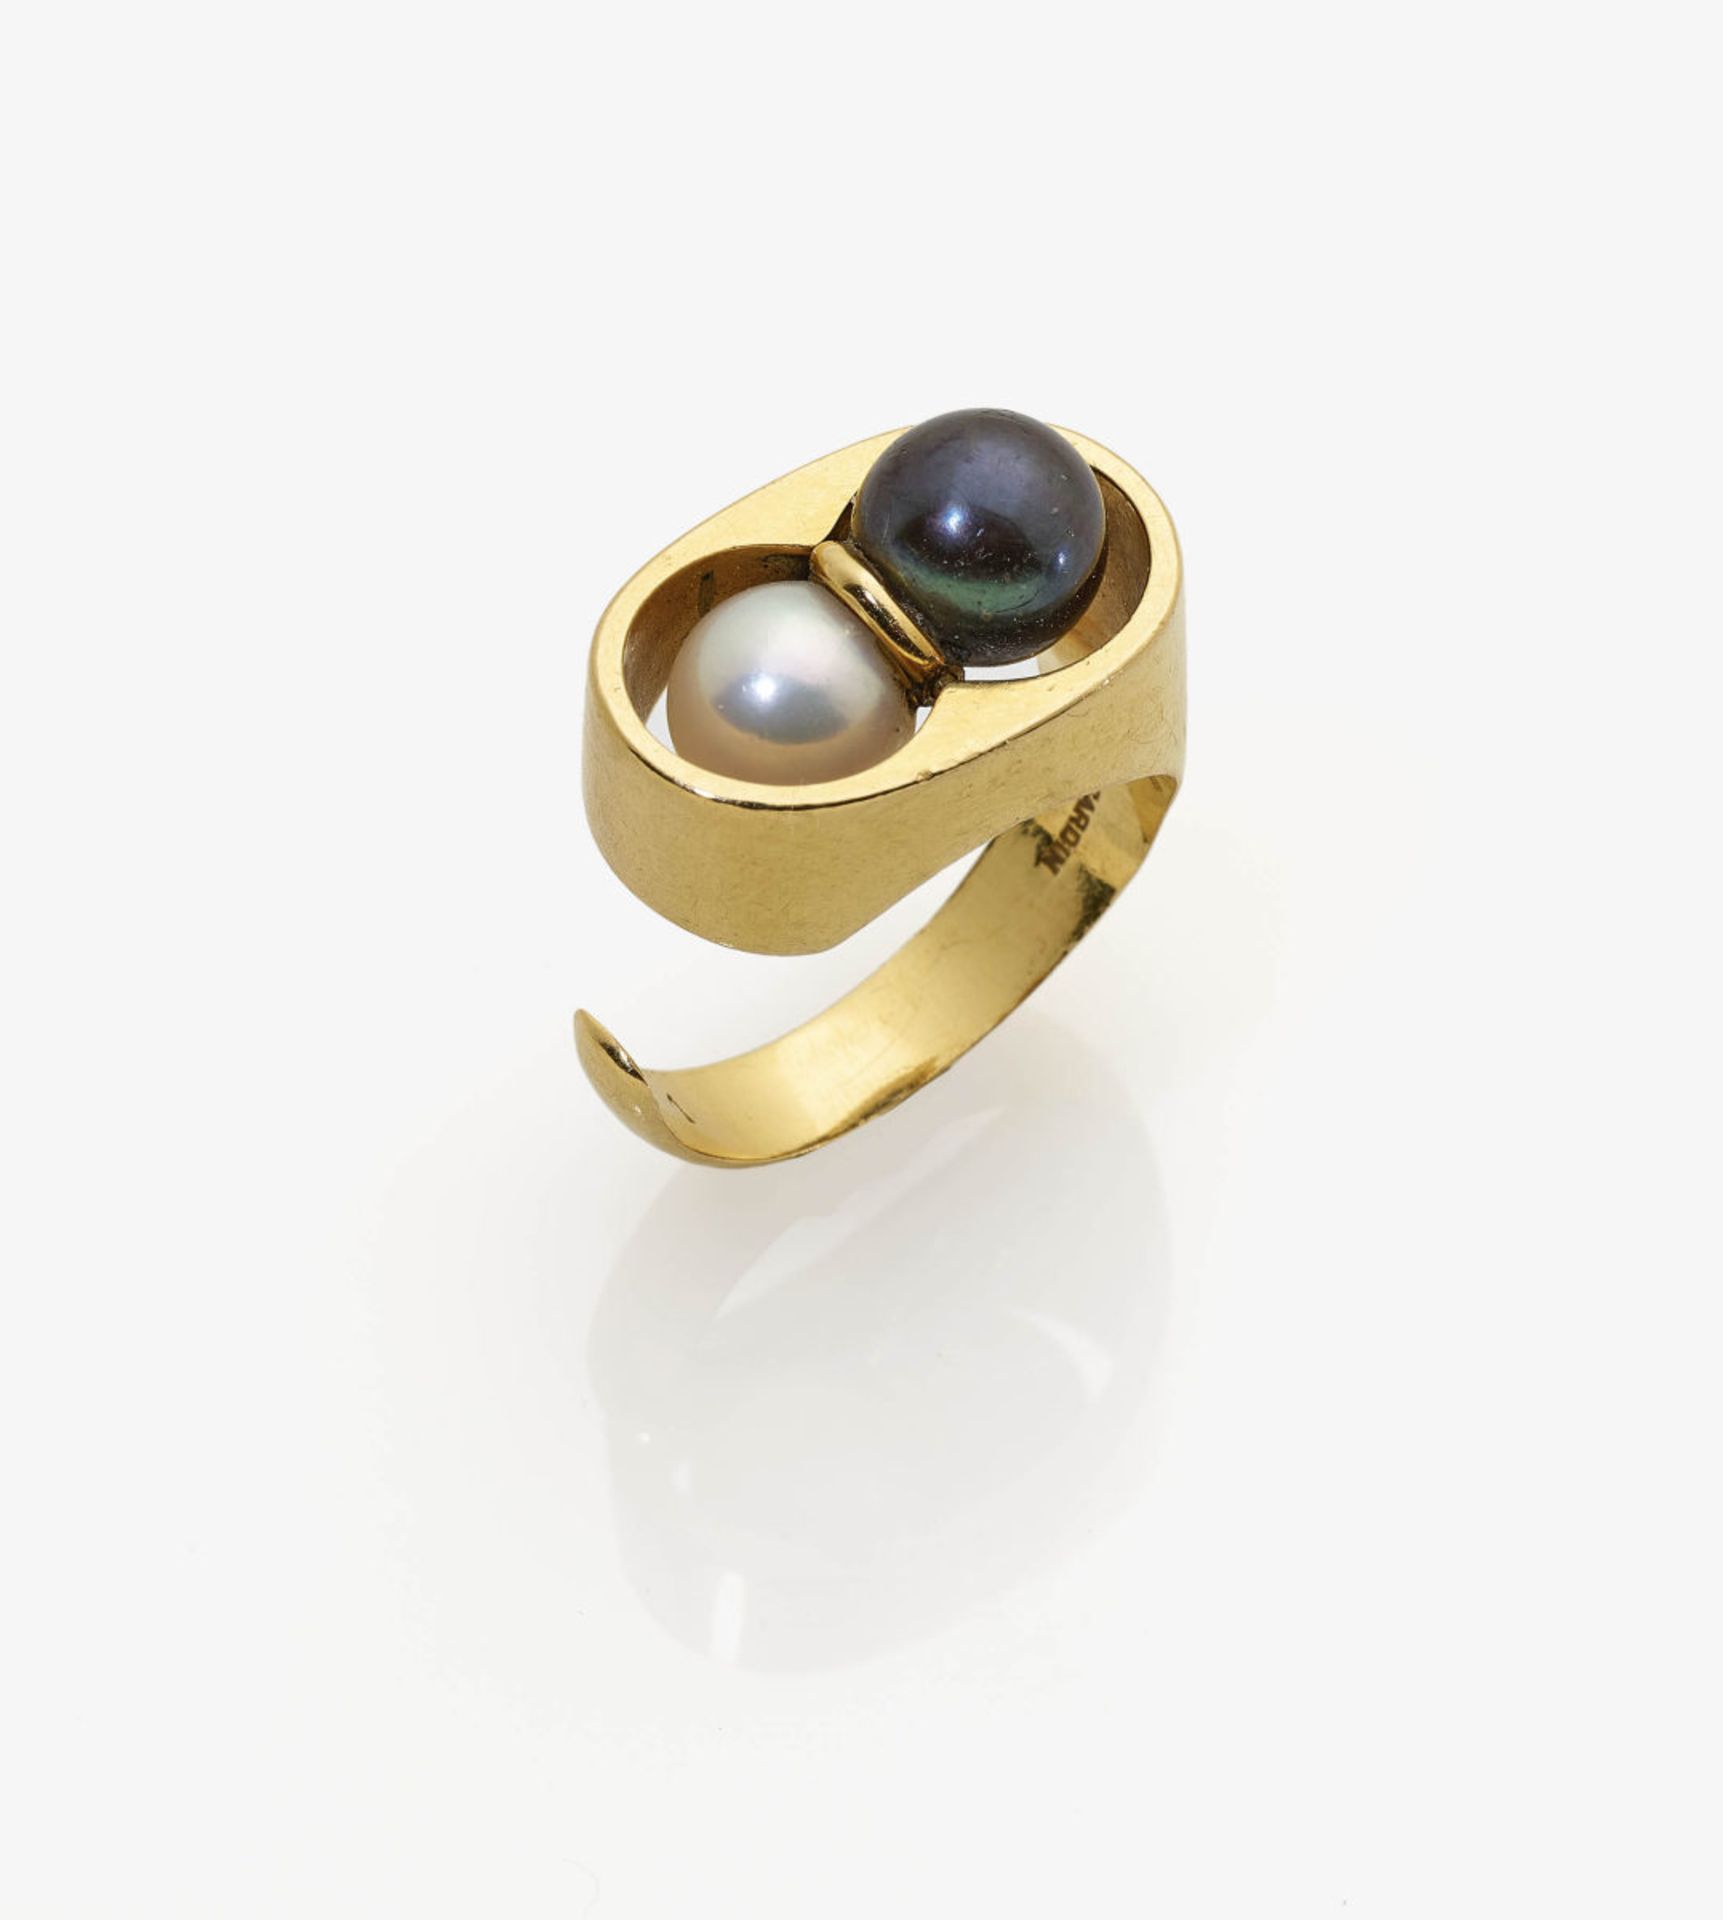 A Ring with White and Black Cultured Pearls